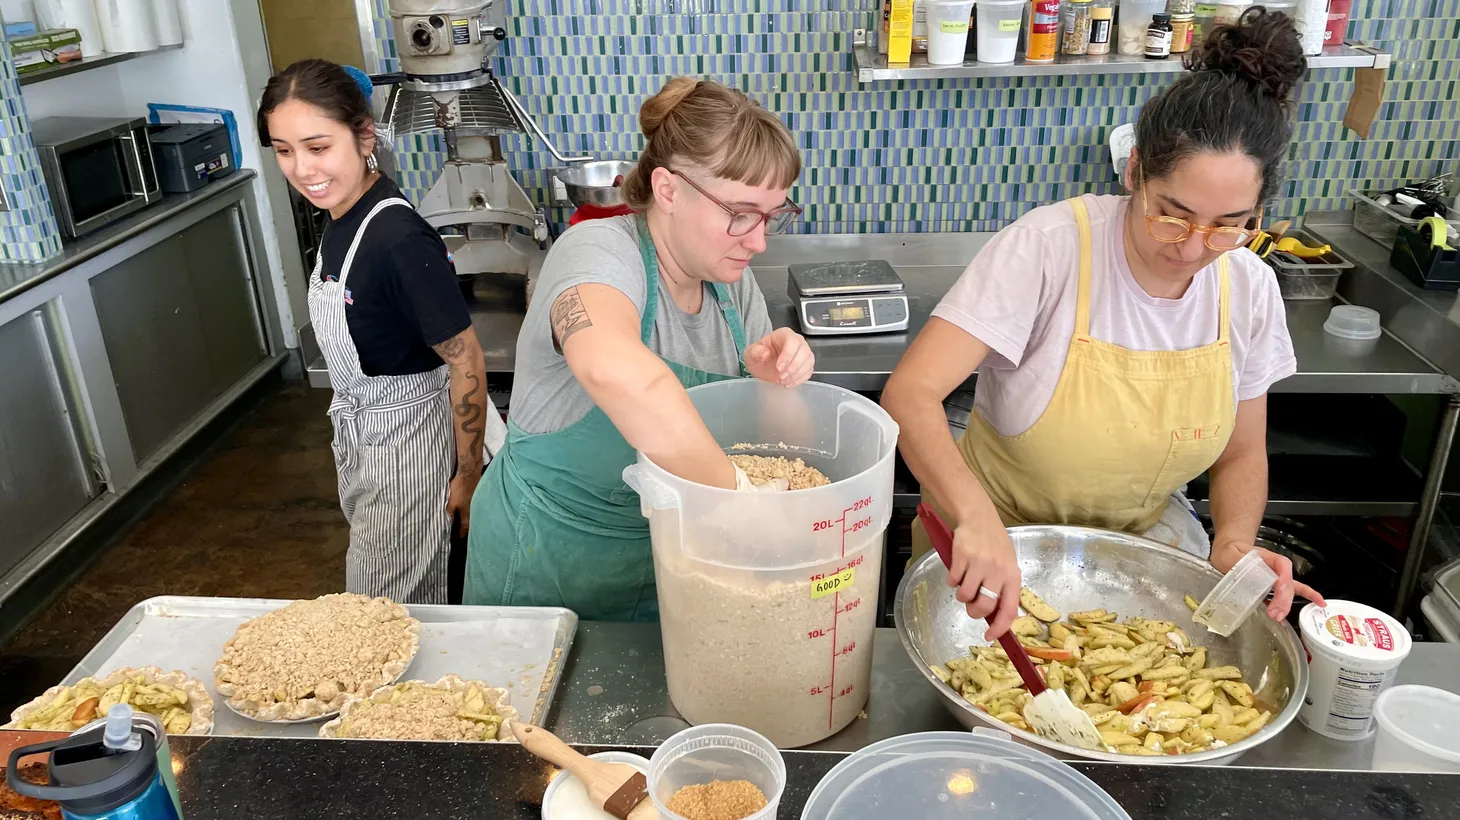 Professional bakers Catalina Flores (left) looks on as Kelly Delany (middle) tops apple pies with crumble, and Sasha Piligian (right) mixes filling. Pie makers across Los Angeles have been working around the clock to bake enough dessert for Thanksgiving dinner.